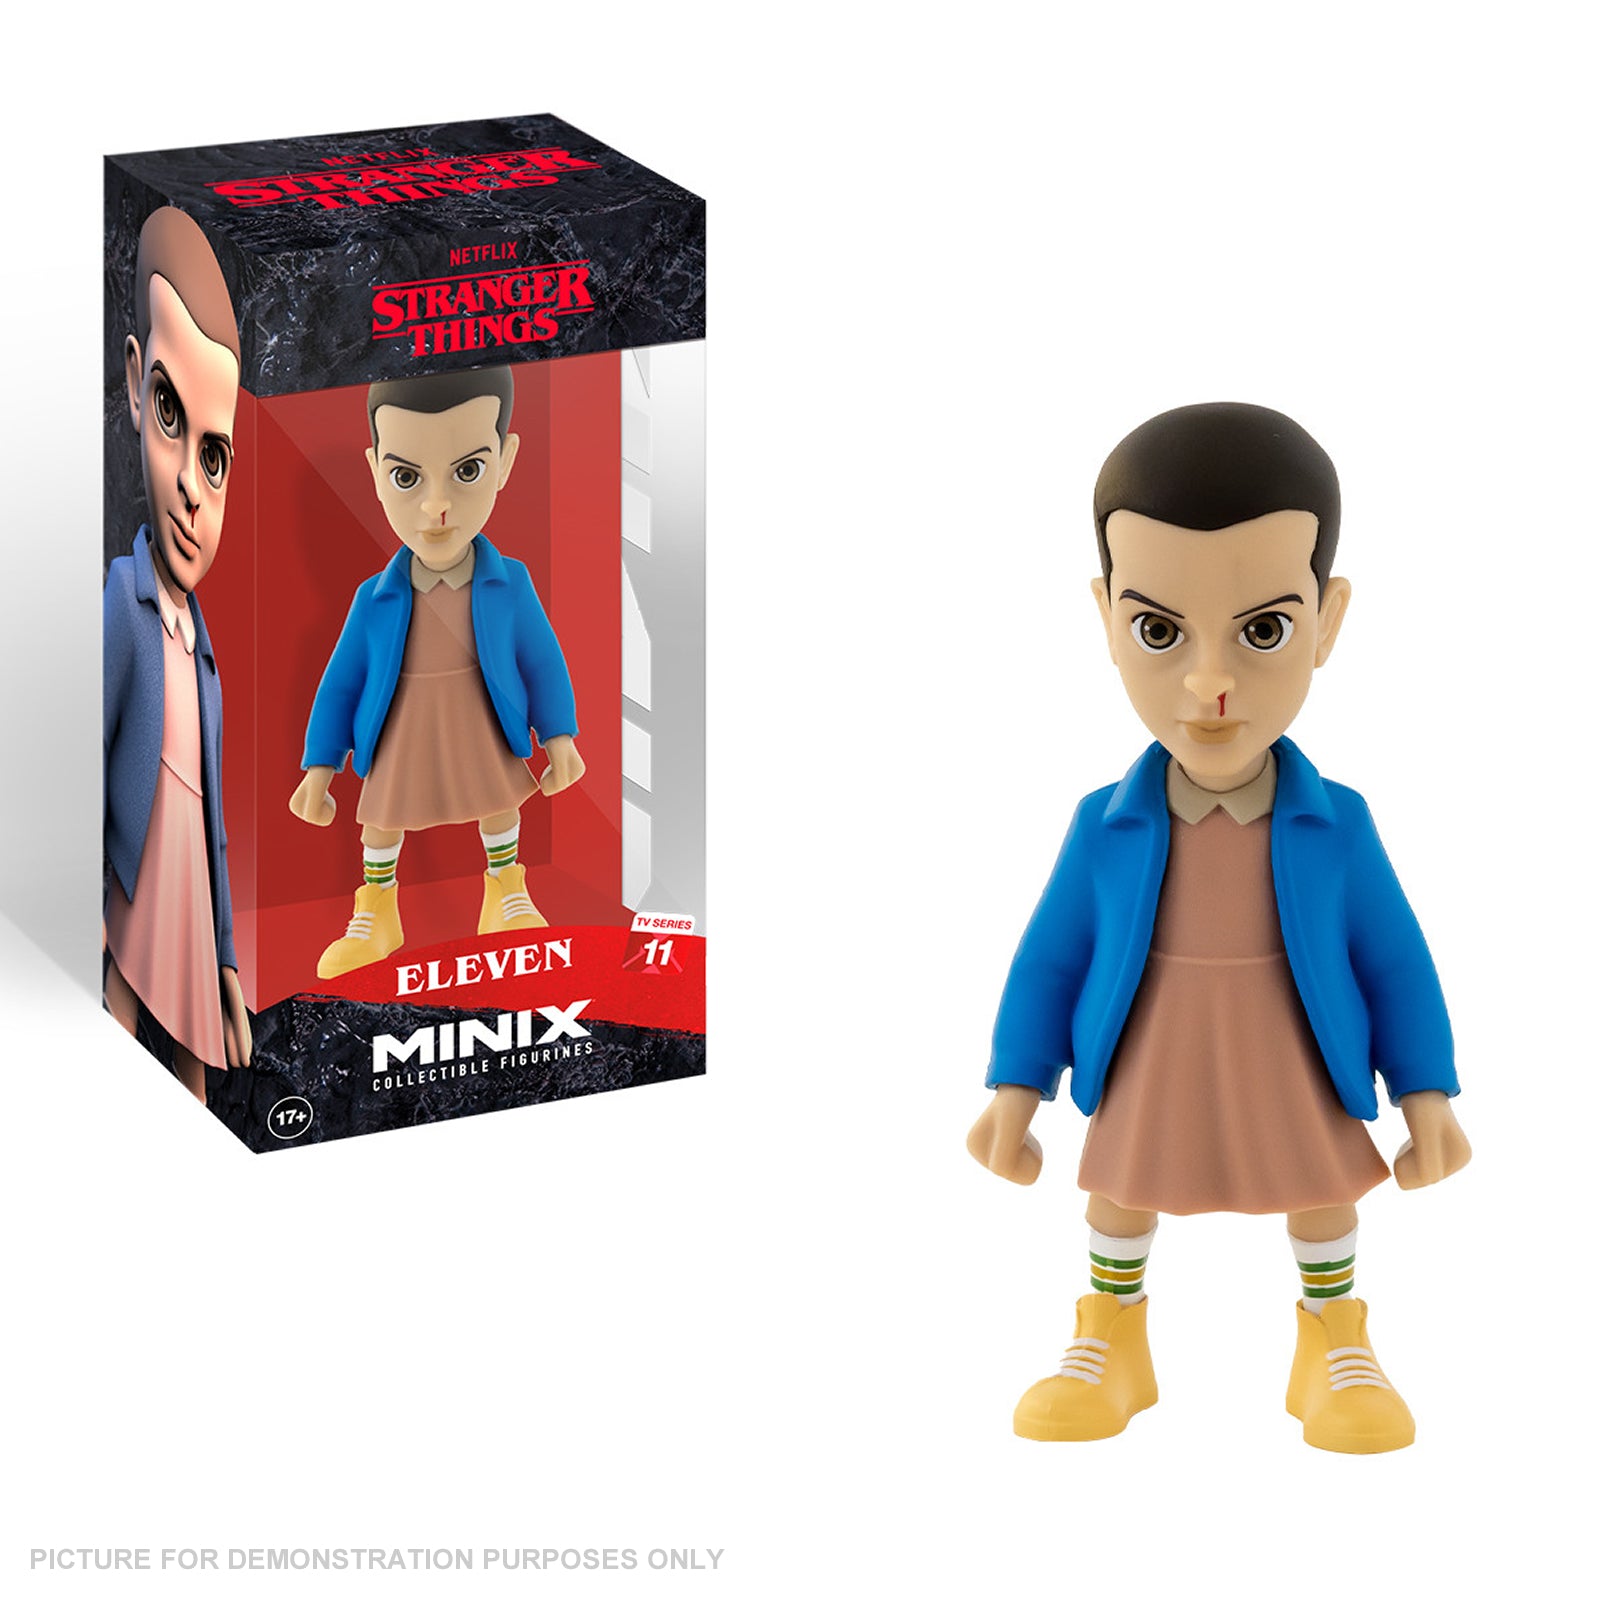 MINIX Collectable Figurine - ELEVEN - Stranger Things